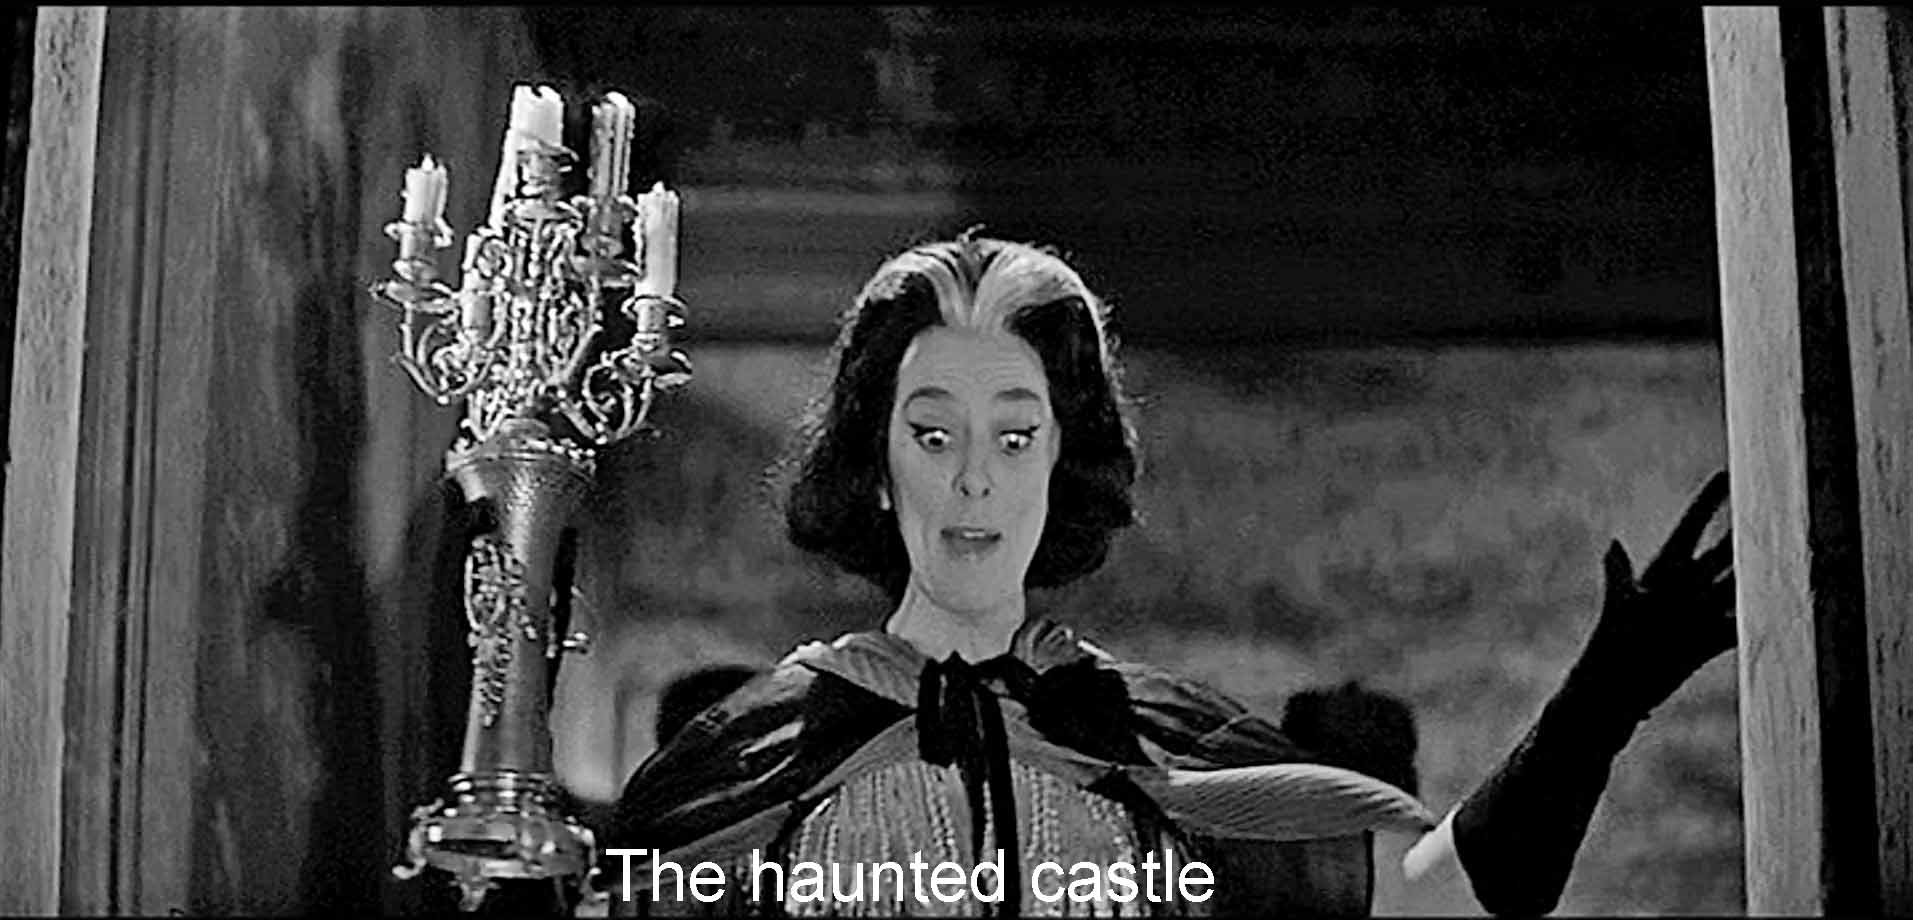 The haunted castle